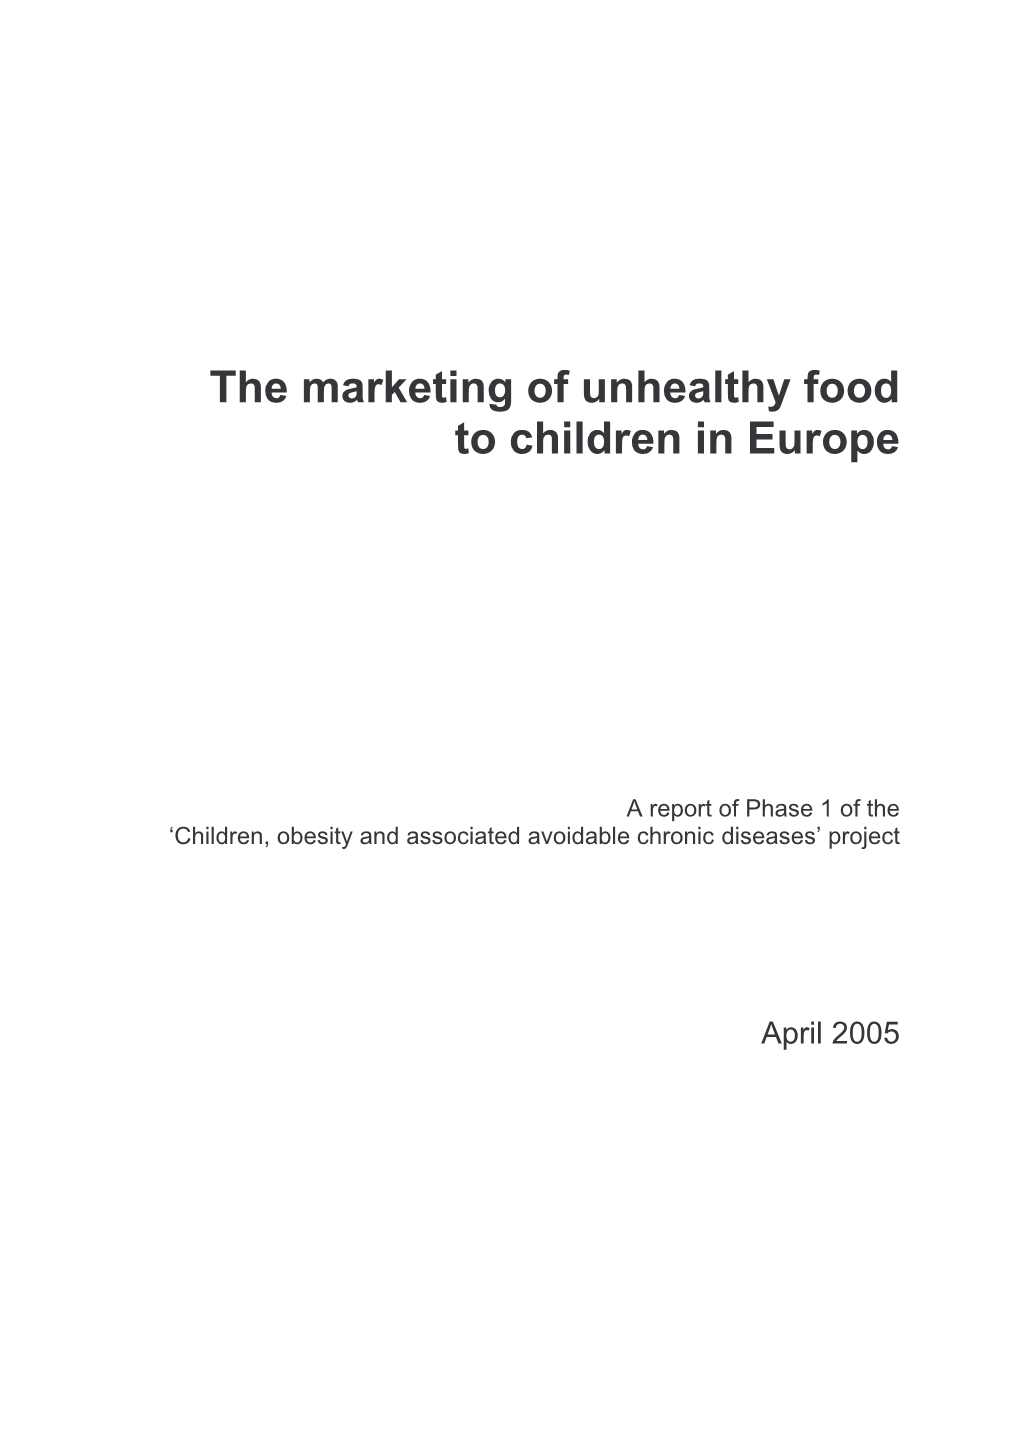 The Marketing of Unhealthy Foods to Children